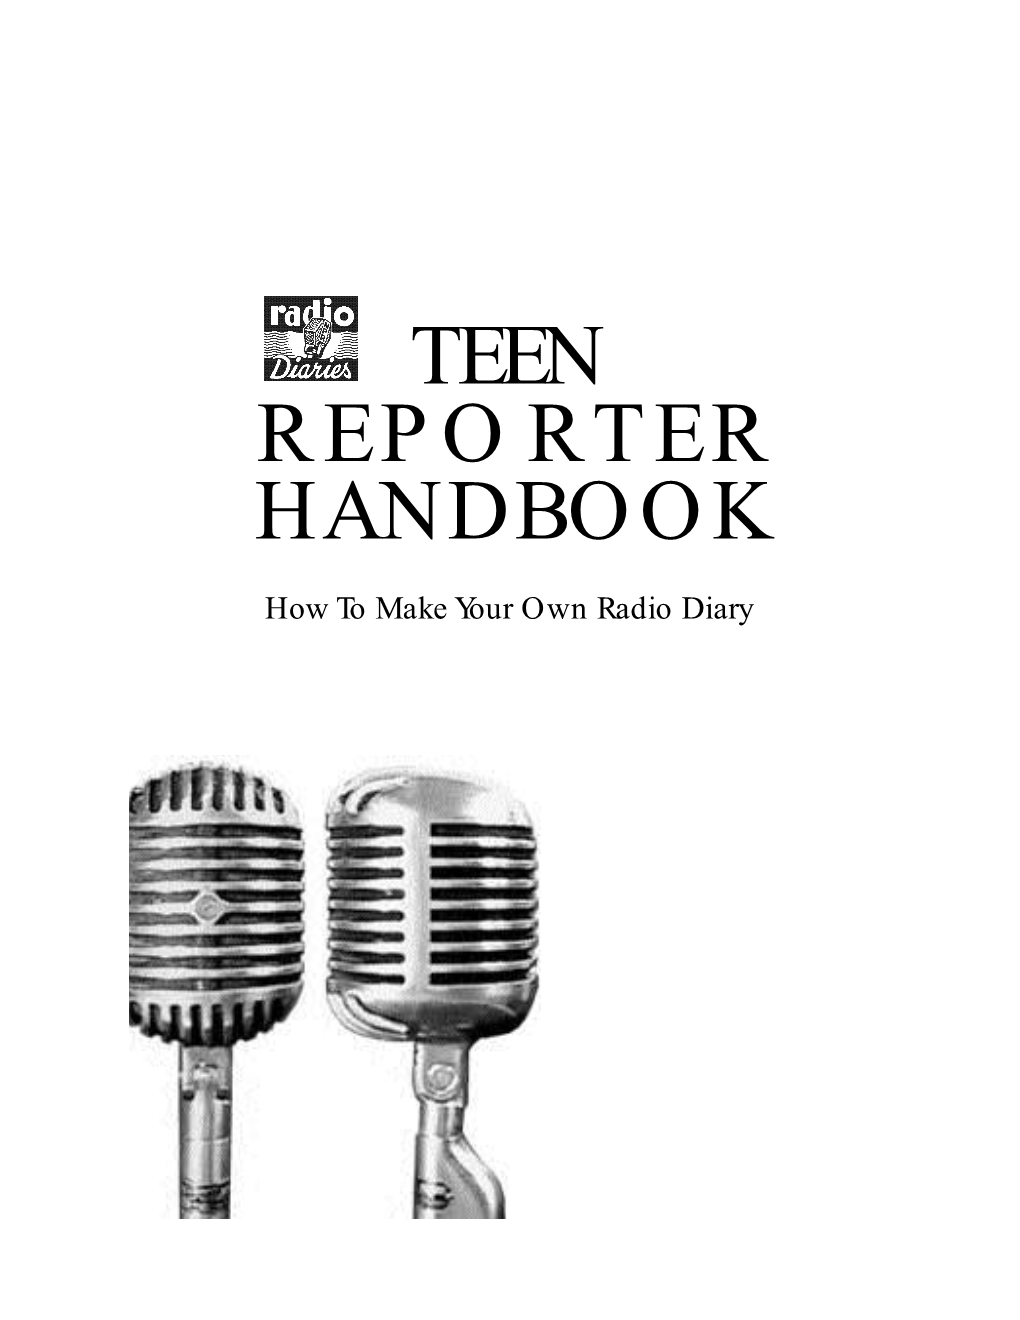 TEEN REPORTER HANDBOOK How to Make Your Own Radio Diary